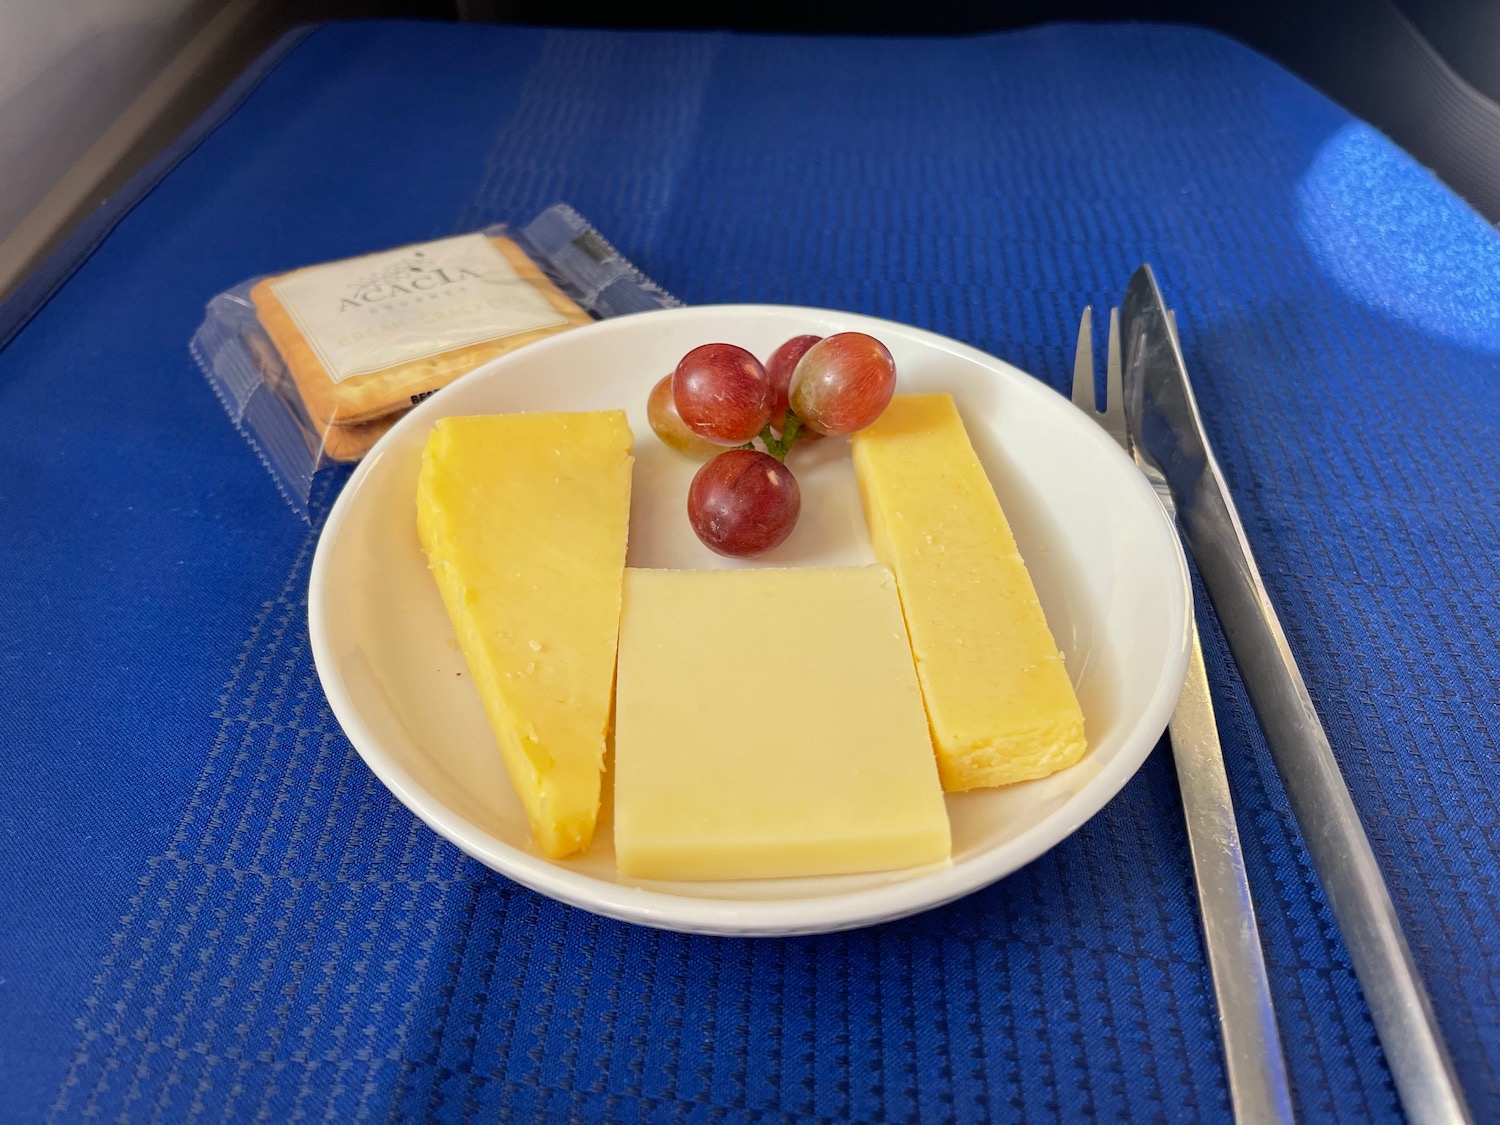 a plate of cheese and grapes on a blue place mat